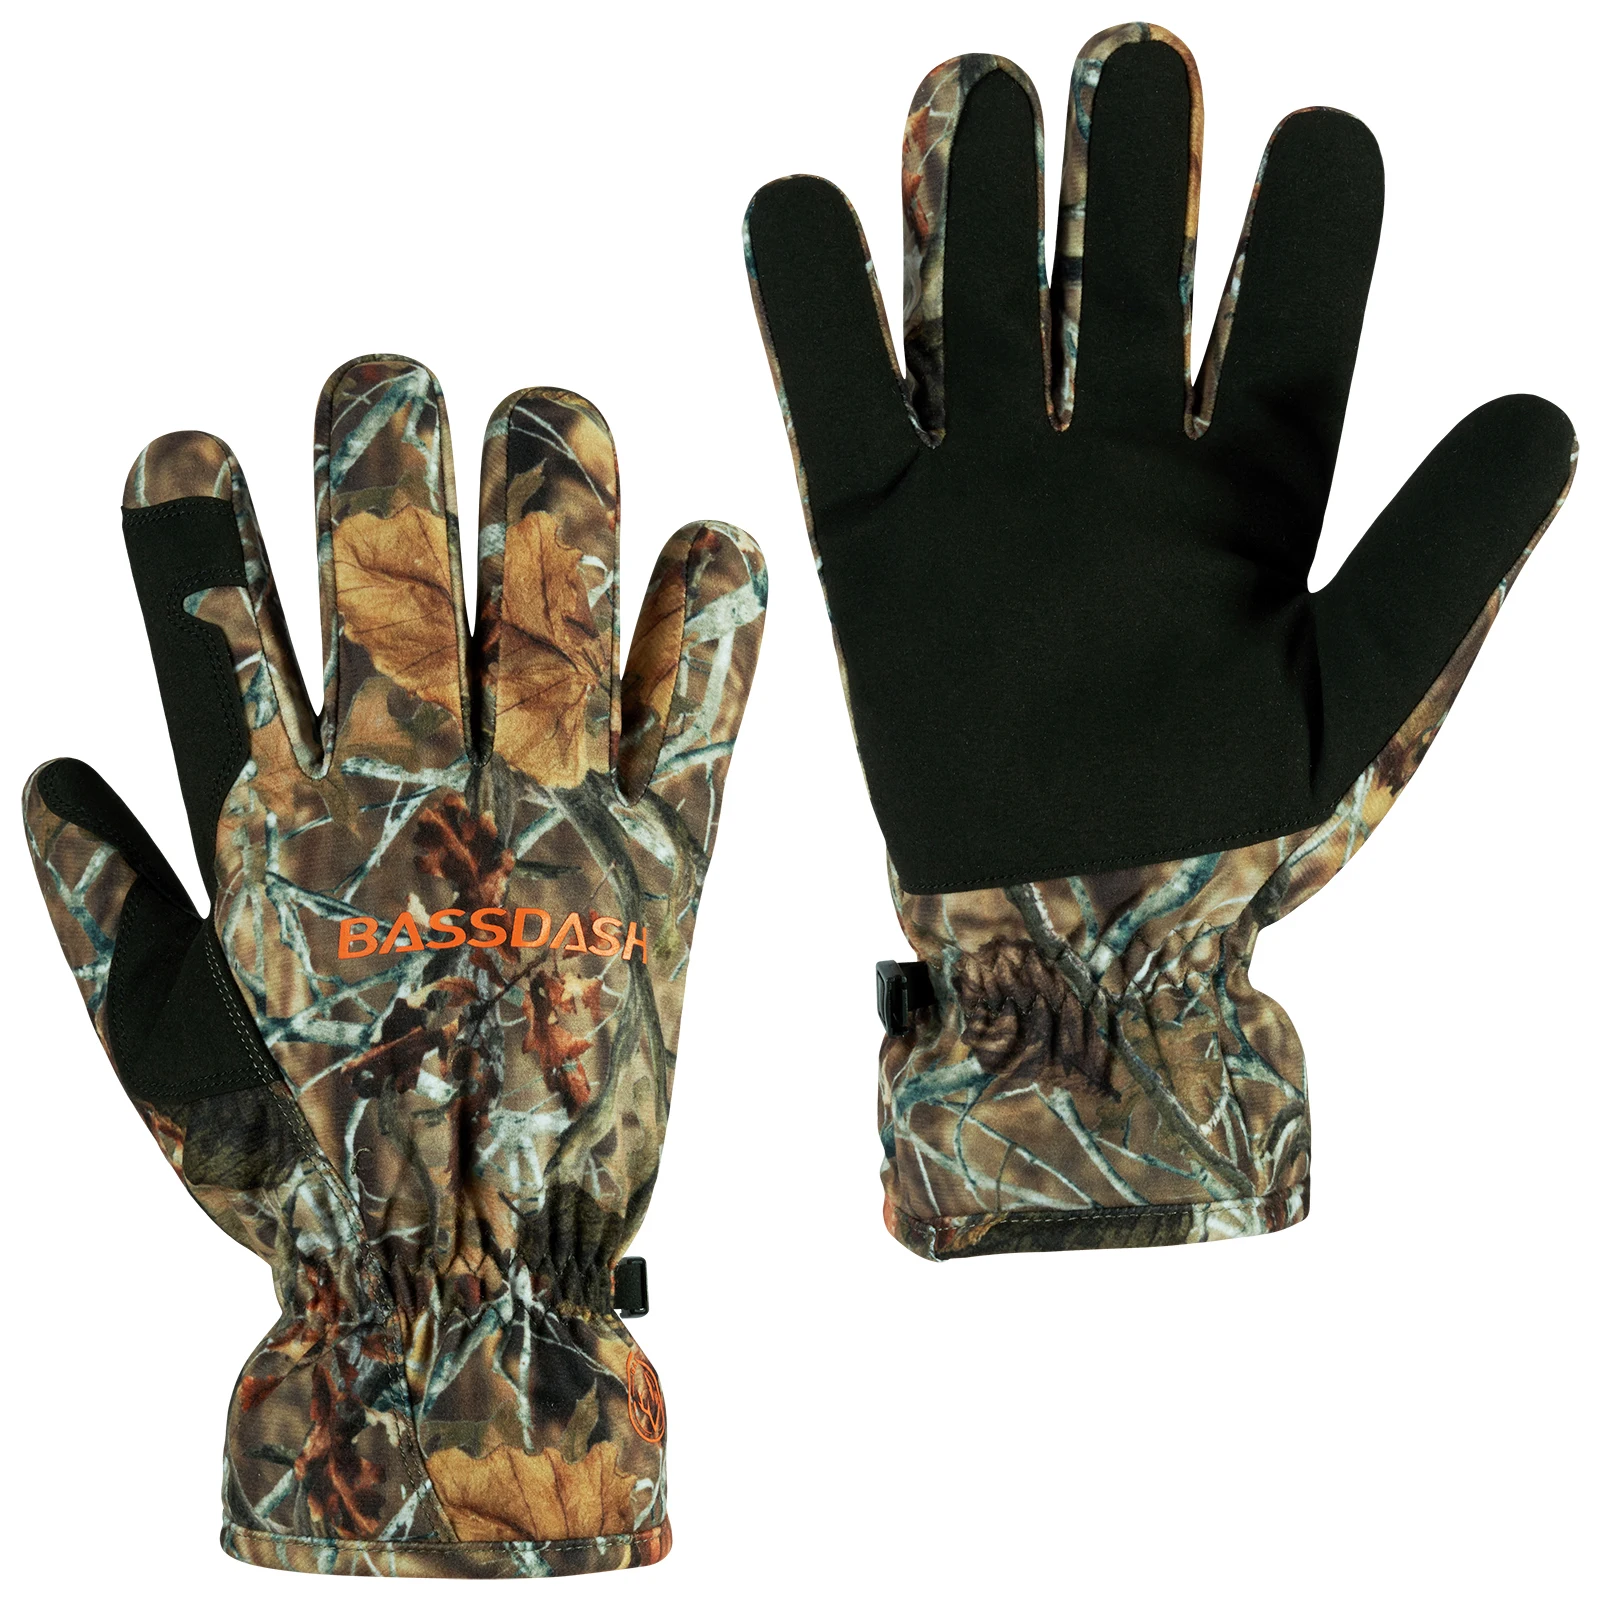 

Bassdash Winter Men’s Hunting Gloves Insulated Waterproof for Cold Weather Keep Warm HG02M